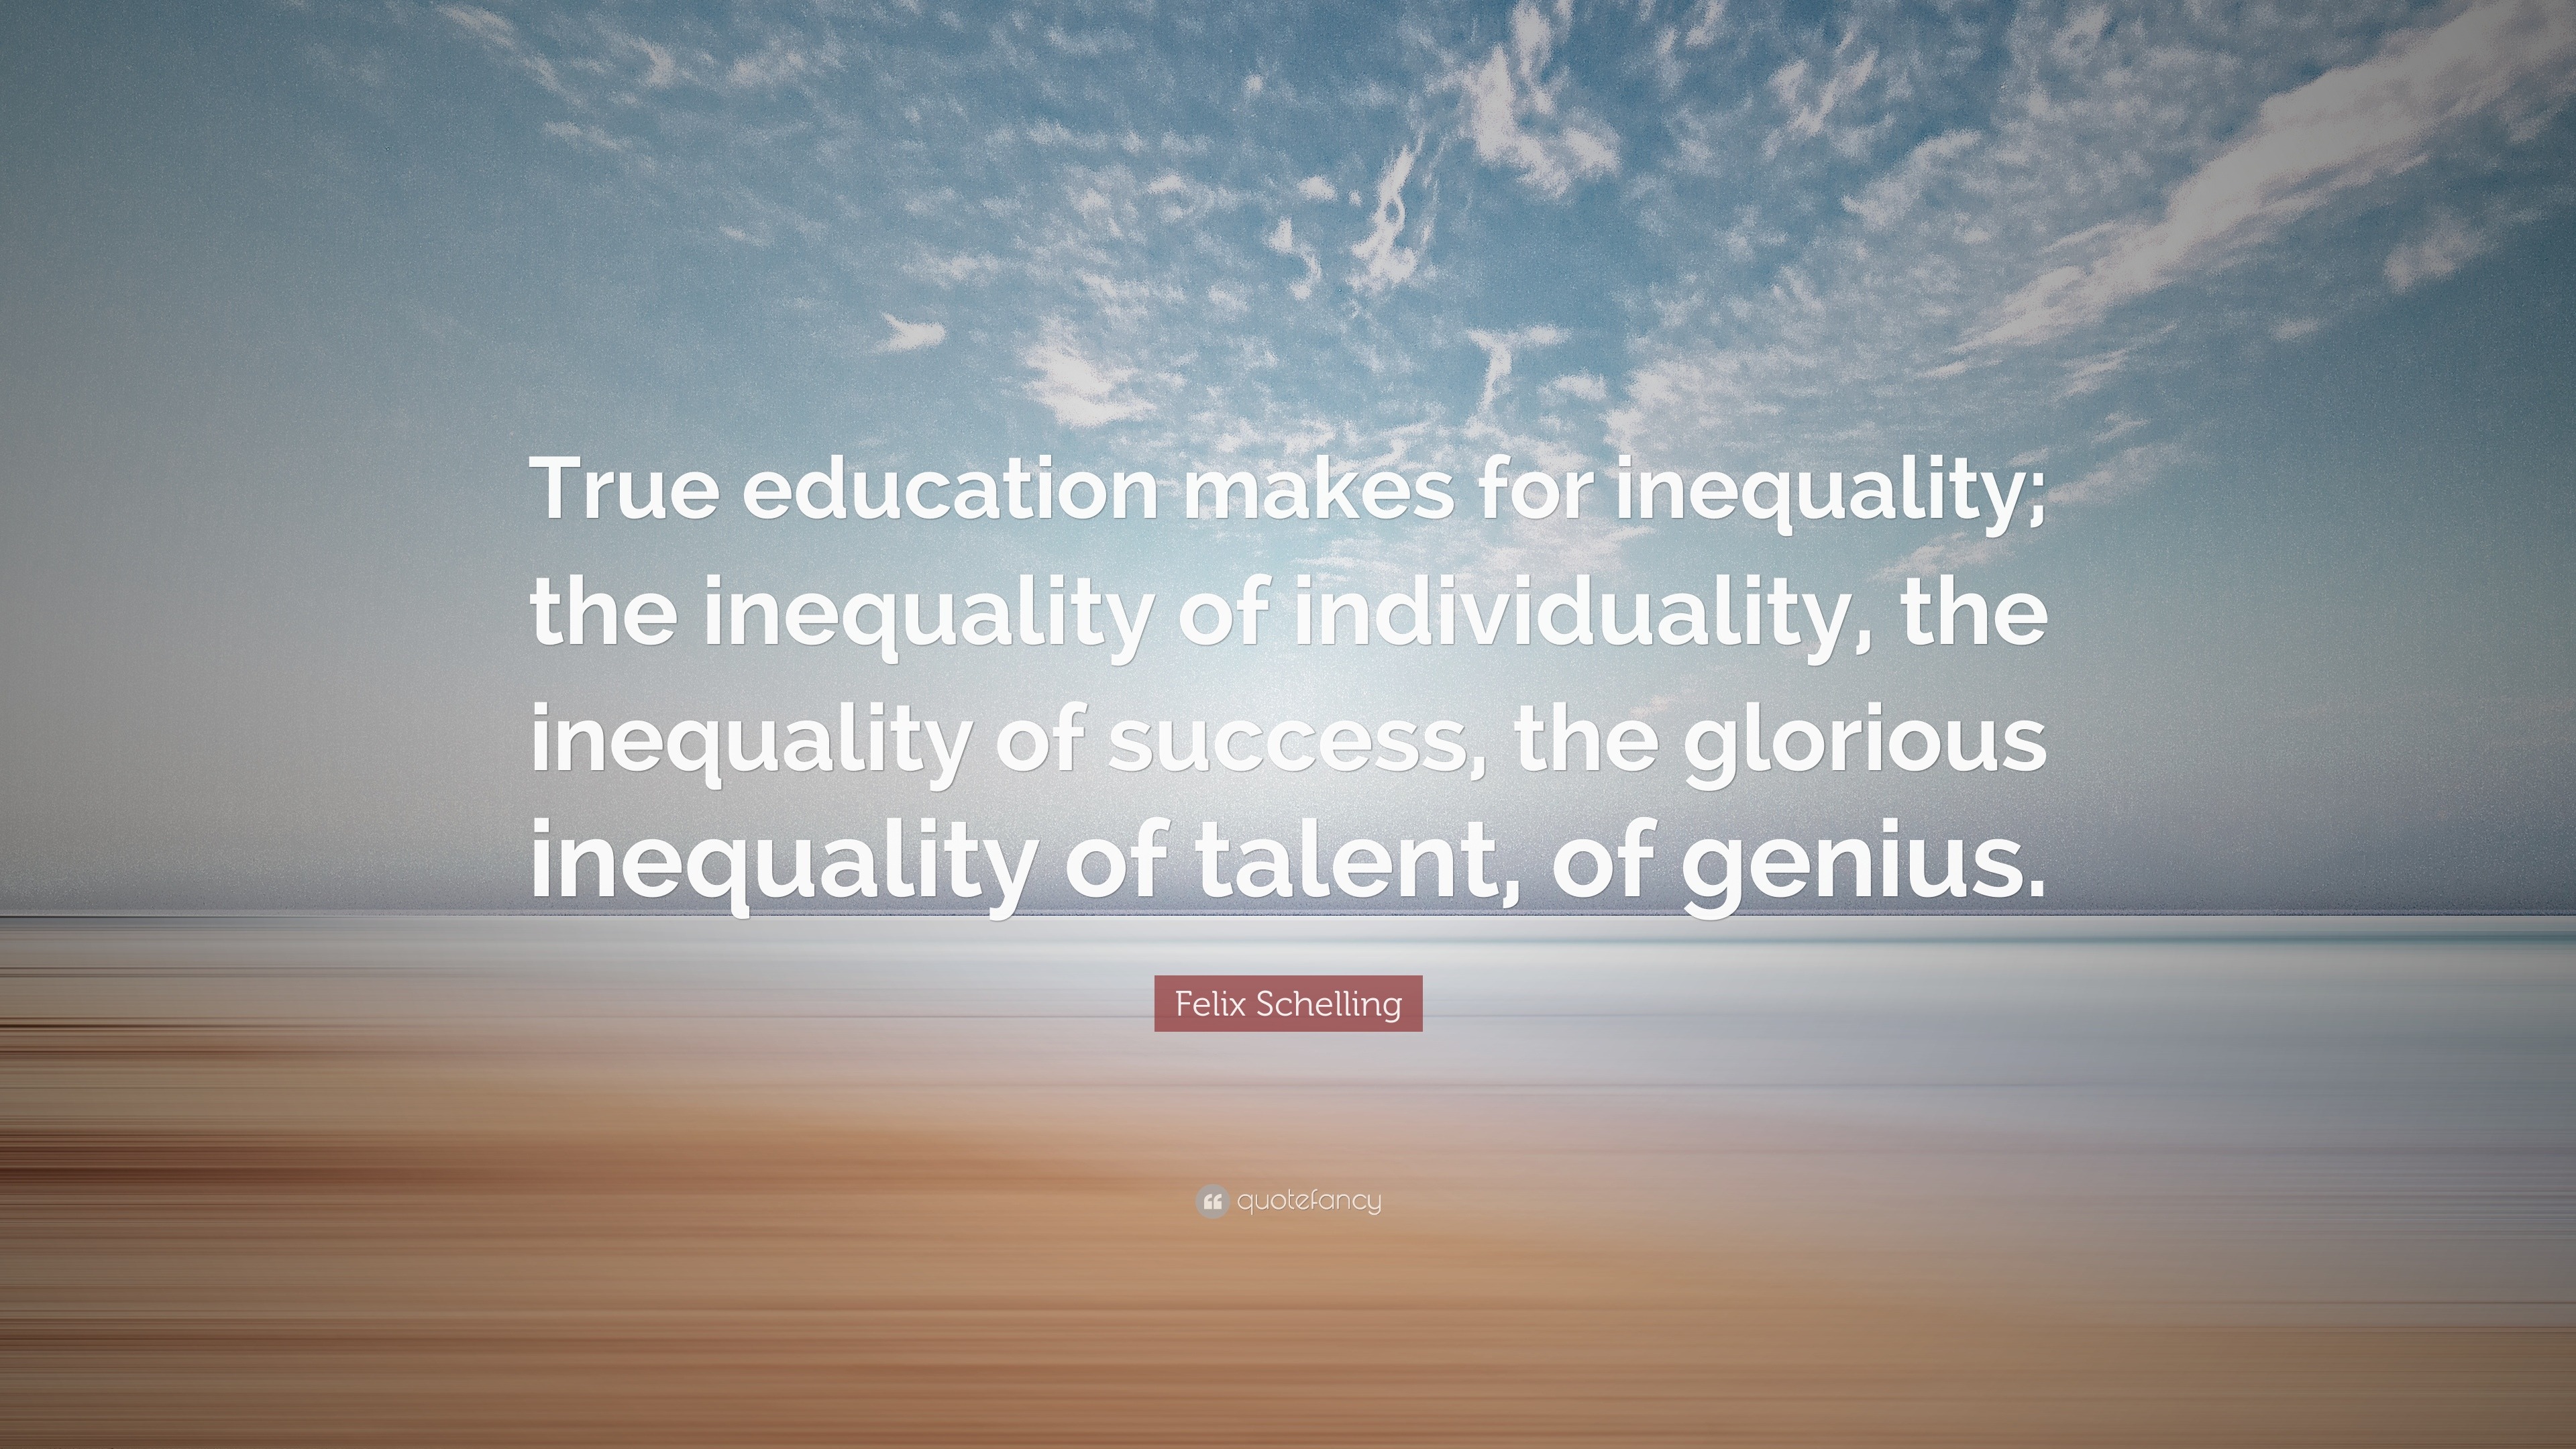 felix-schelling-quote-true-education-makes-for-inequality-the-inequality-of-individuality